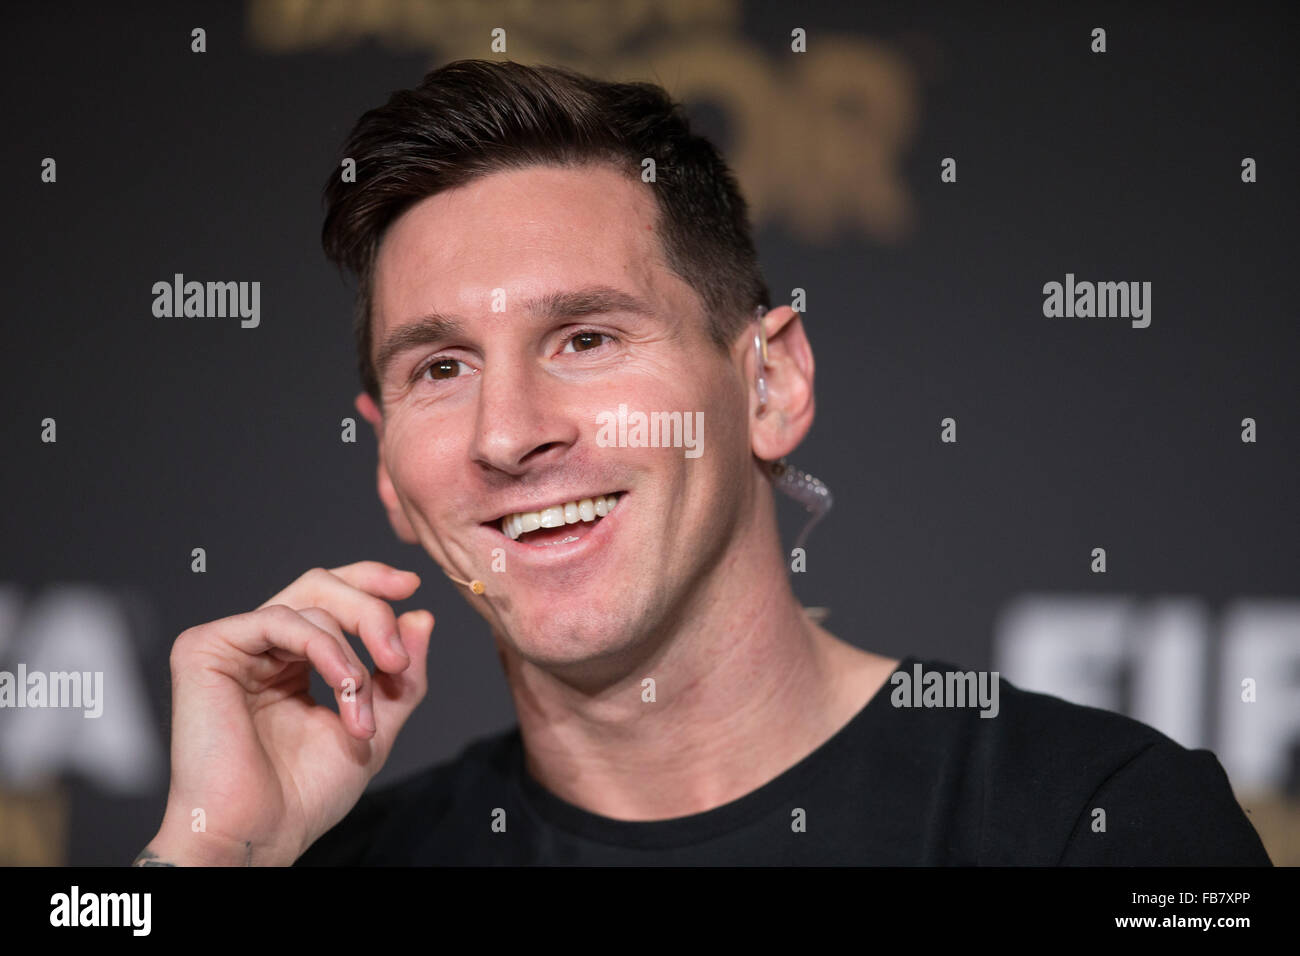 Zurich, Switzerland. 11th Jan, 2016. Nominee for the 2015 FIFA World Player of the Year FC Barcelona's Lionel Messi of Argentina attends a news conference prior to the Ballon d'Or 2015 awards ceremony in Zurich, Switzerland, on Jan. 11, 2016. © Xu Jinquan/Xinhua/Alamy Live News Stock Photo